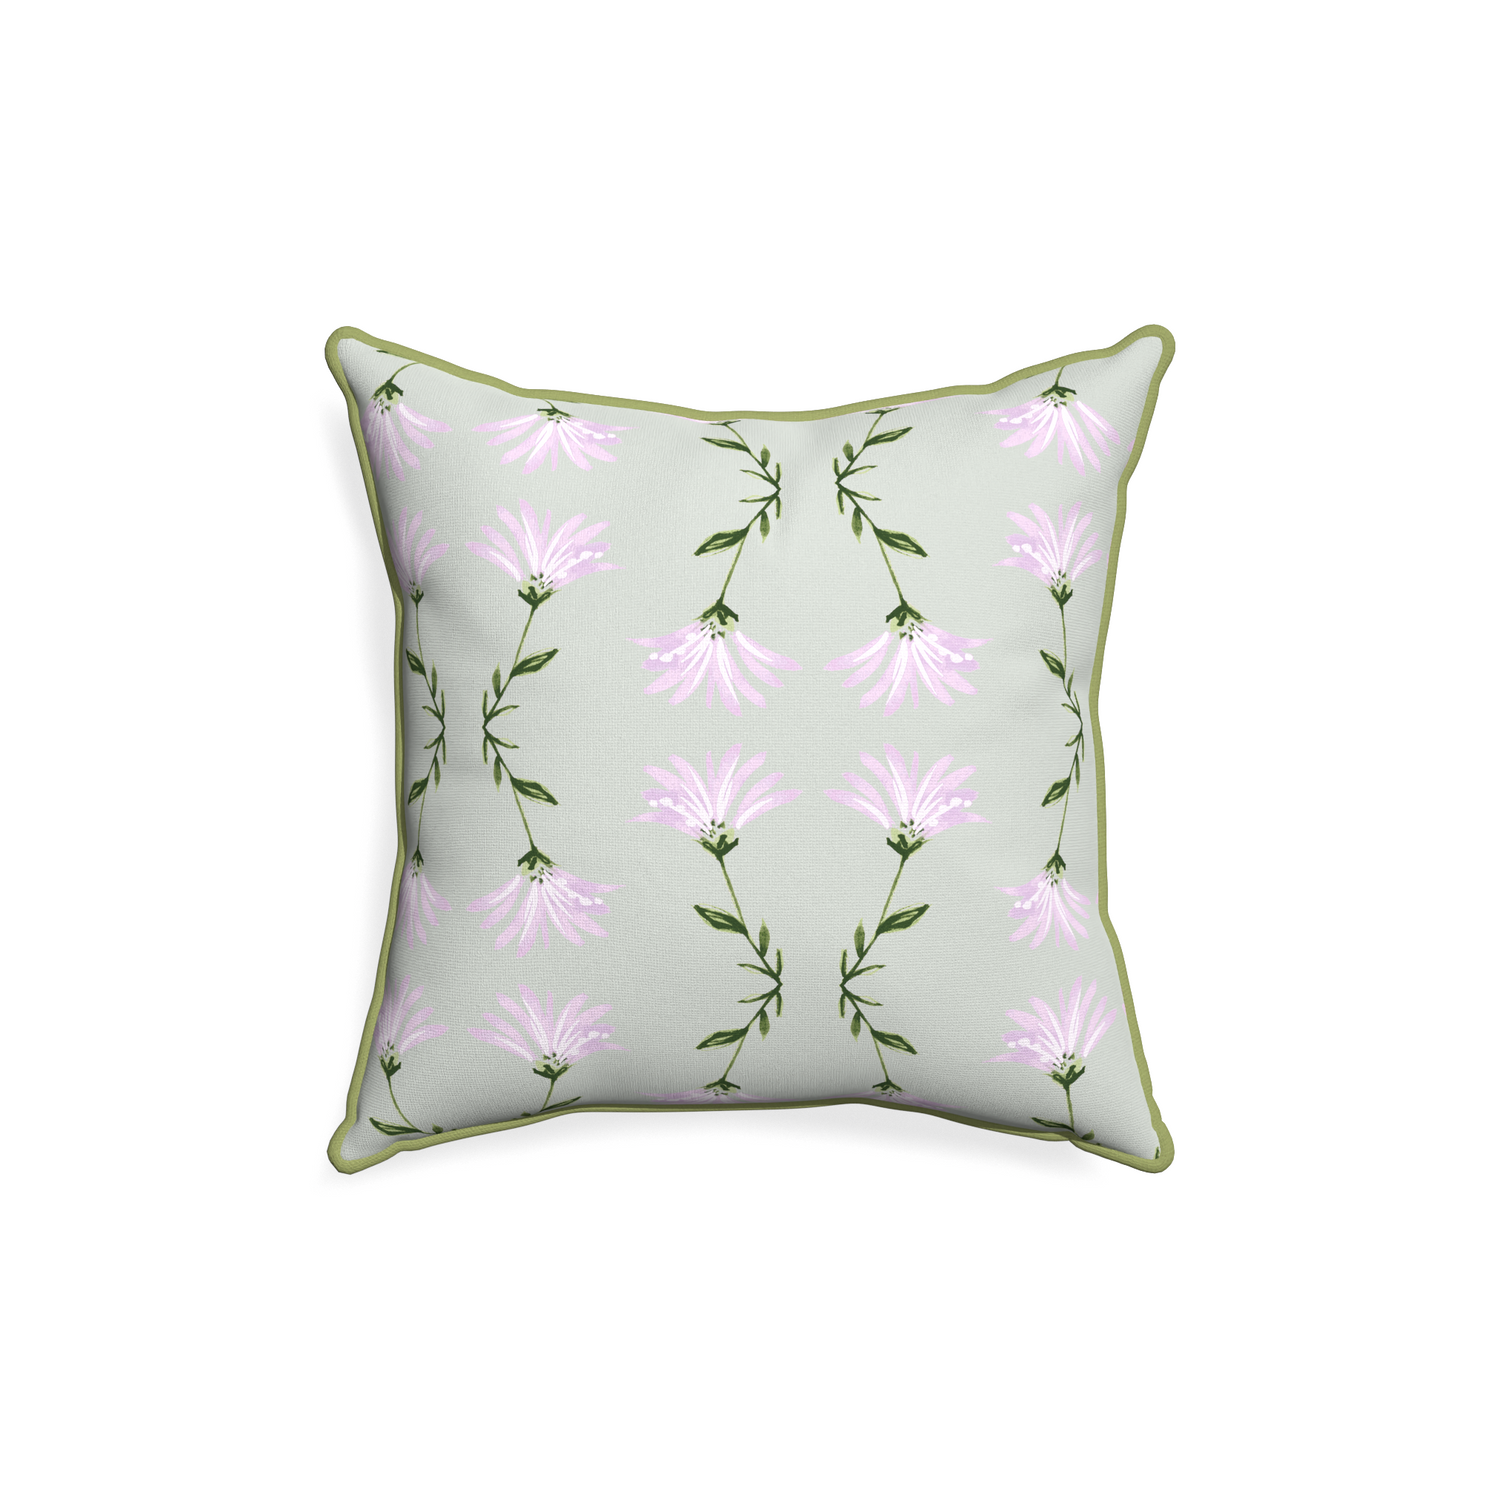 18-square marina sage custom pillow with moss piping on white background